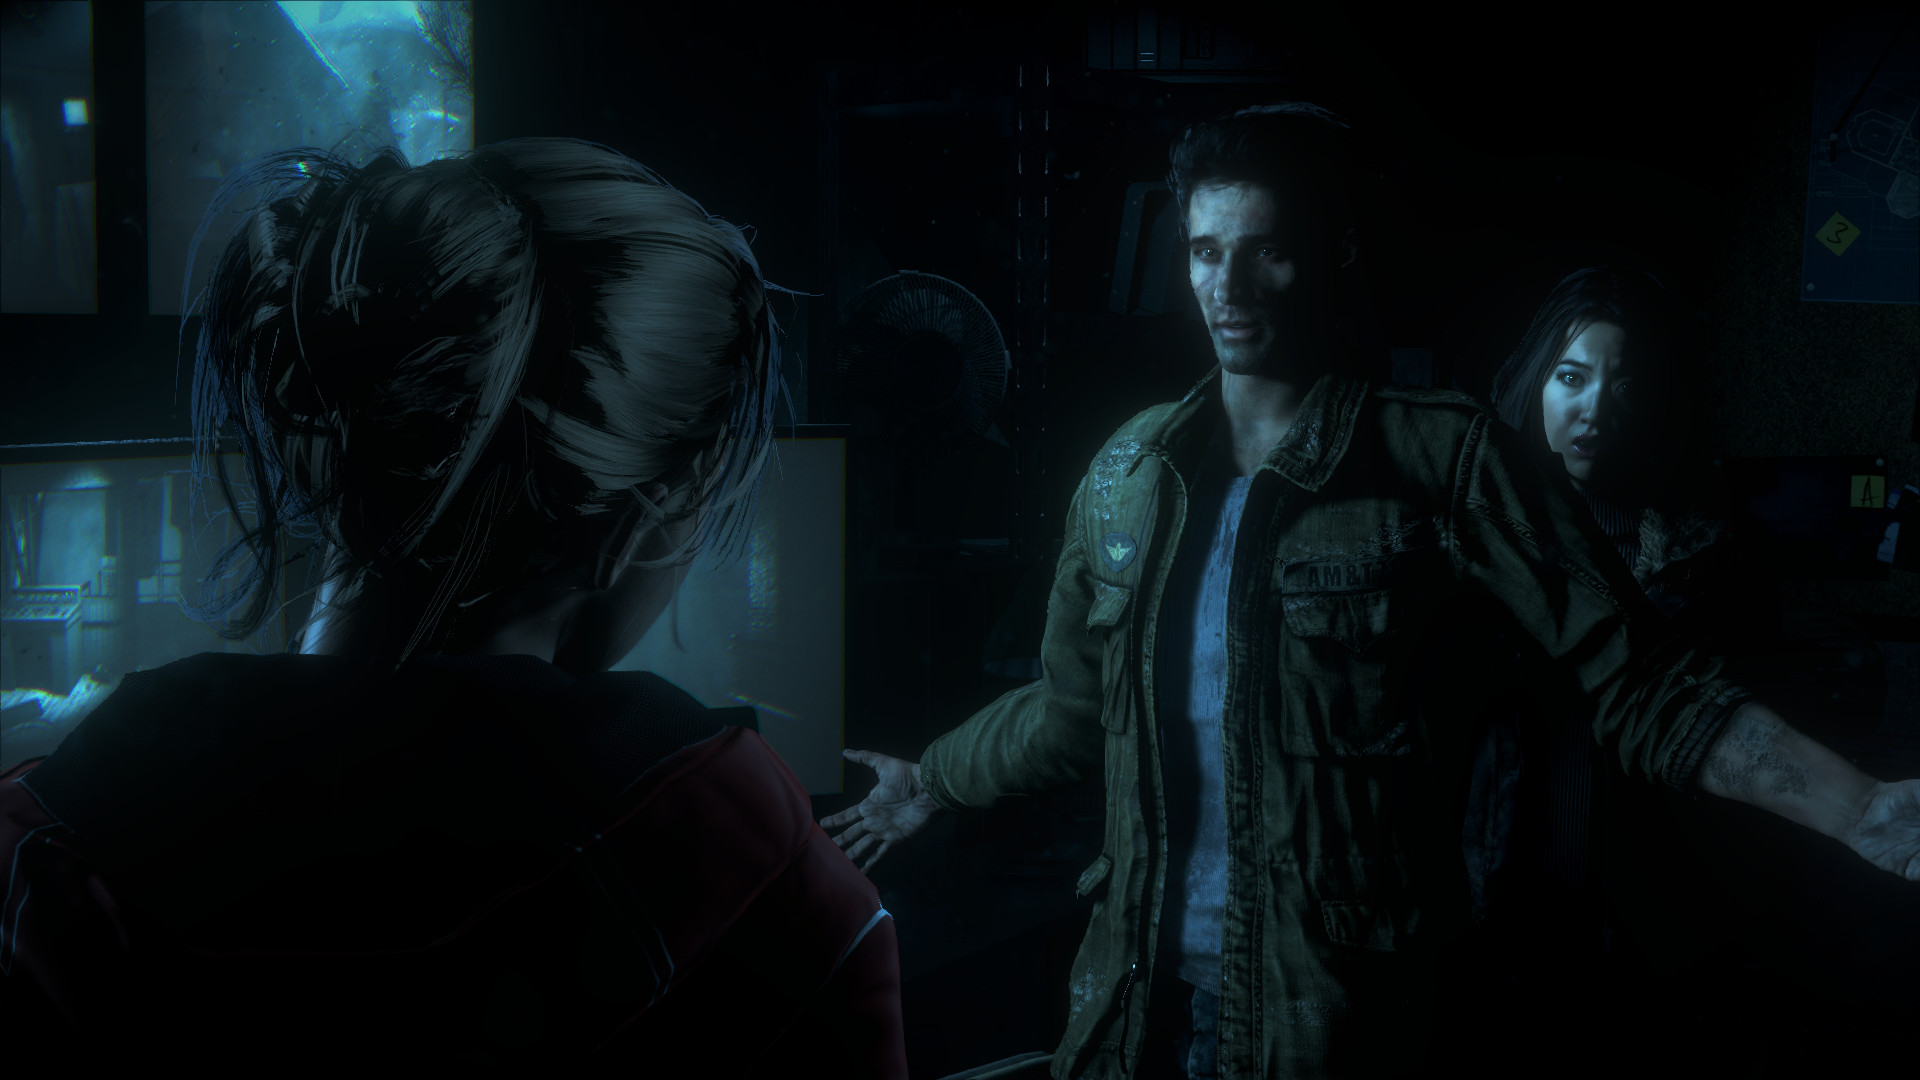 PS4 Exclusive Until Dawn Gets Beautiful 1080p Screenshots Showing  Characters and Environments